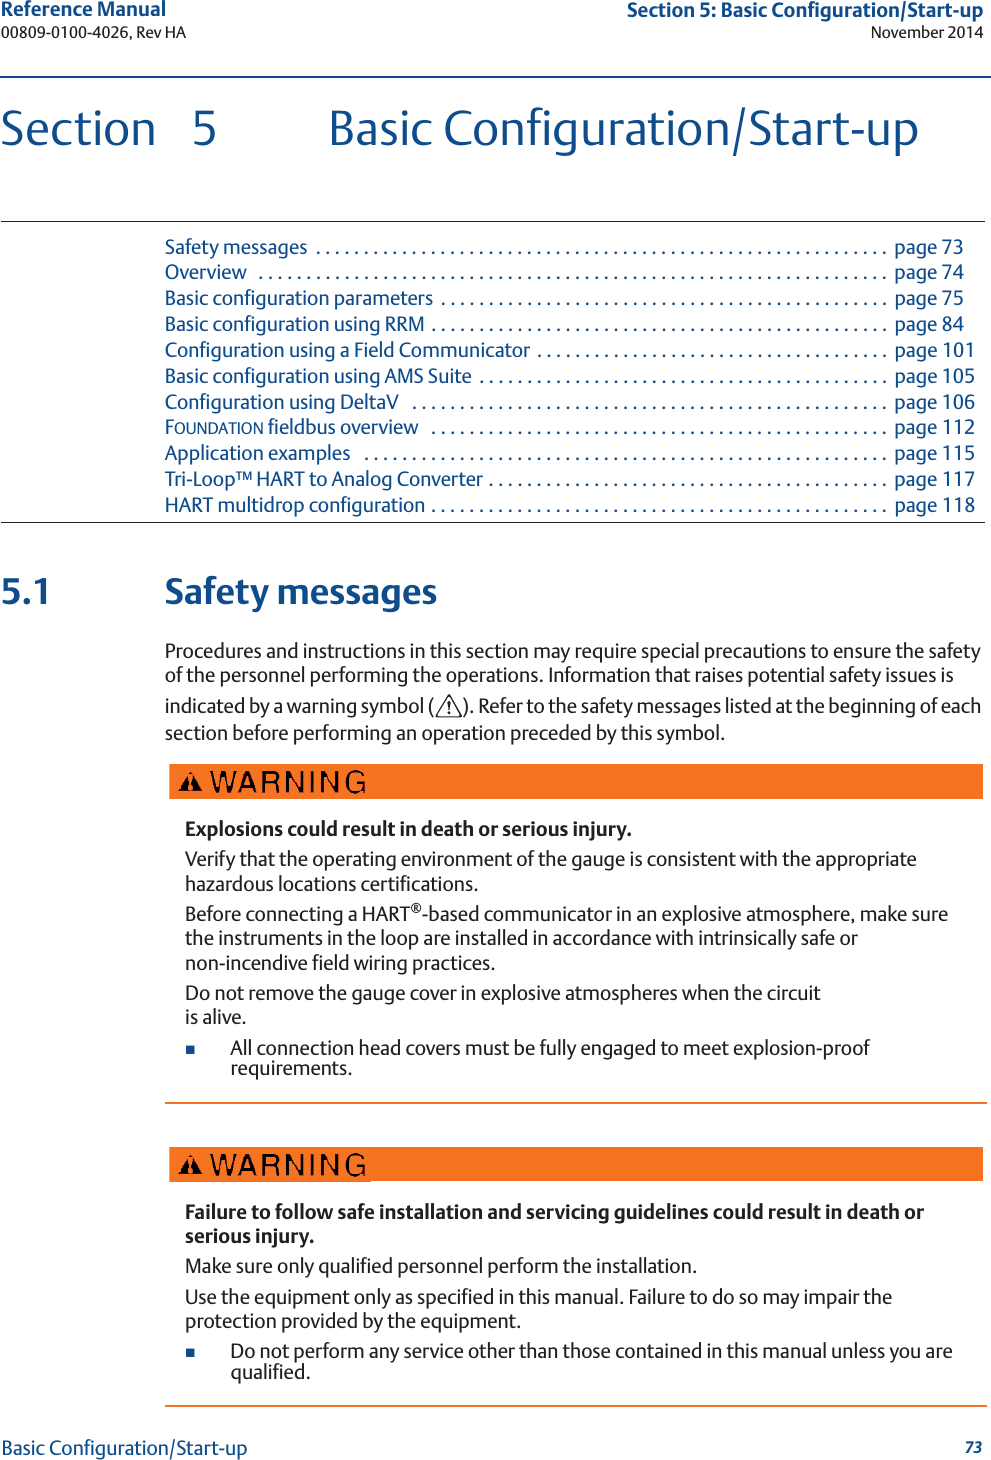 73Reference Manual 00809-0100-4026, Rev HASection 5: Basic Configuration/Start-upNovember 2014Basic Configuration/Start-upSection 5 Basic Configuration/Start-upSafety messages  . . . . . . . . . . . . . . . . . . . . . . . . . . . . . . . . . . . . . . . . . . . . . . . . . . . . . . . . . . . . page 73Overview   . . . . . . . . . . . . . . . . . . . . . . . . . . . . . . . . . . . . . . . . . . . . . . . . . . . . . . . . . . . . . . . . . .  page 74Basic configuration parameters  . . . . . . . . . . . . . . . . . . . . . . . . . . . . . . . . . . . . . . . . . . . . . . .  page 75Basic configuration using RRM . . . . . . . . . . . . . . . . . . . . . . . . . . . . . . . . . . . . . . . . . . . . . . . .  page 84Configuration using a Field Communicator . . . . . . . . . . . . . . . . . . . . . . . . . . . . . . . . . . . . .  page 101Basic configuration using AMS Suite . . . . . . . . . . . . . . . . . . . . . . . . . . . . . . . . . . . . . . . . . . .  page 105Configuration using DeltaV   . . . . . . . . . . . . . . . . . . . . . . . . . . . . . . . . . . . . . . . . . . . . . . . . . . page 106FOUNDATION fieldbus overview   . . . . . . . . . . . . . . . . . . . . . . . . . . . . . . . . . . . . . . . . . . . . . . . .  page 112Application examples   . . . . . . . . . . . . . . . . . . . . . . . . . . . . . . . . . . . . . . . . . . . . . . . . . . . . . . . page 115Tri-Loop™ HART to Analog Converter . . . . . . . . . . . . . . . . . . . . . . . . . . . . . . . . . . . . . . . . . .  page 117HART multidrop configuration . . . . . . . . . . . . . . . . . . . . . . . . . . . . . . . . . . . . . . . . . . . . . . . .  page 1185.1 Safety messagesProcedures and instructions in this section may require special precautions to ensure the safety of the personnel performing the operations. Information that raises potential safety issues is indicated by a warning symbol ( ). Refer to the safety messages listed at the beginning of each section before performing an operation preceded by this symbol.Explosions could result in death or serious injury.Verify that the operating environment of the gauge is consistent with the appropriate hazardous locations certifications.Before connecting a HART®-based communicator in an explosive atmosphere, make sure the instruments in the loop are installed in accordance with intrinsically safe or non-incendive field wiring practices.Do not remove the gauge cover in explosive atmospheres when the circuit is alive.All connection head covers must be fully engaged to meet explosion-proof requirements.Failure to follow safe installation and servicing guidelines could result in death or serious injury.Make sure only qualified personnel perform the installation.Use the equipment only as specified in this manual. Failure to do so may impair the protection provided by the equipment.Do not perform any service other than those contained in this manual unless you are qualified.